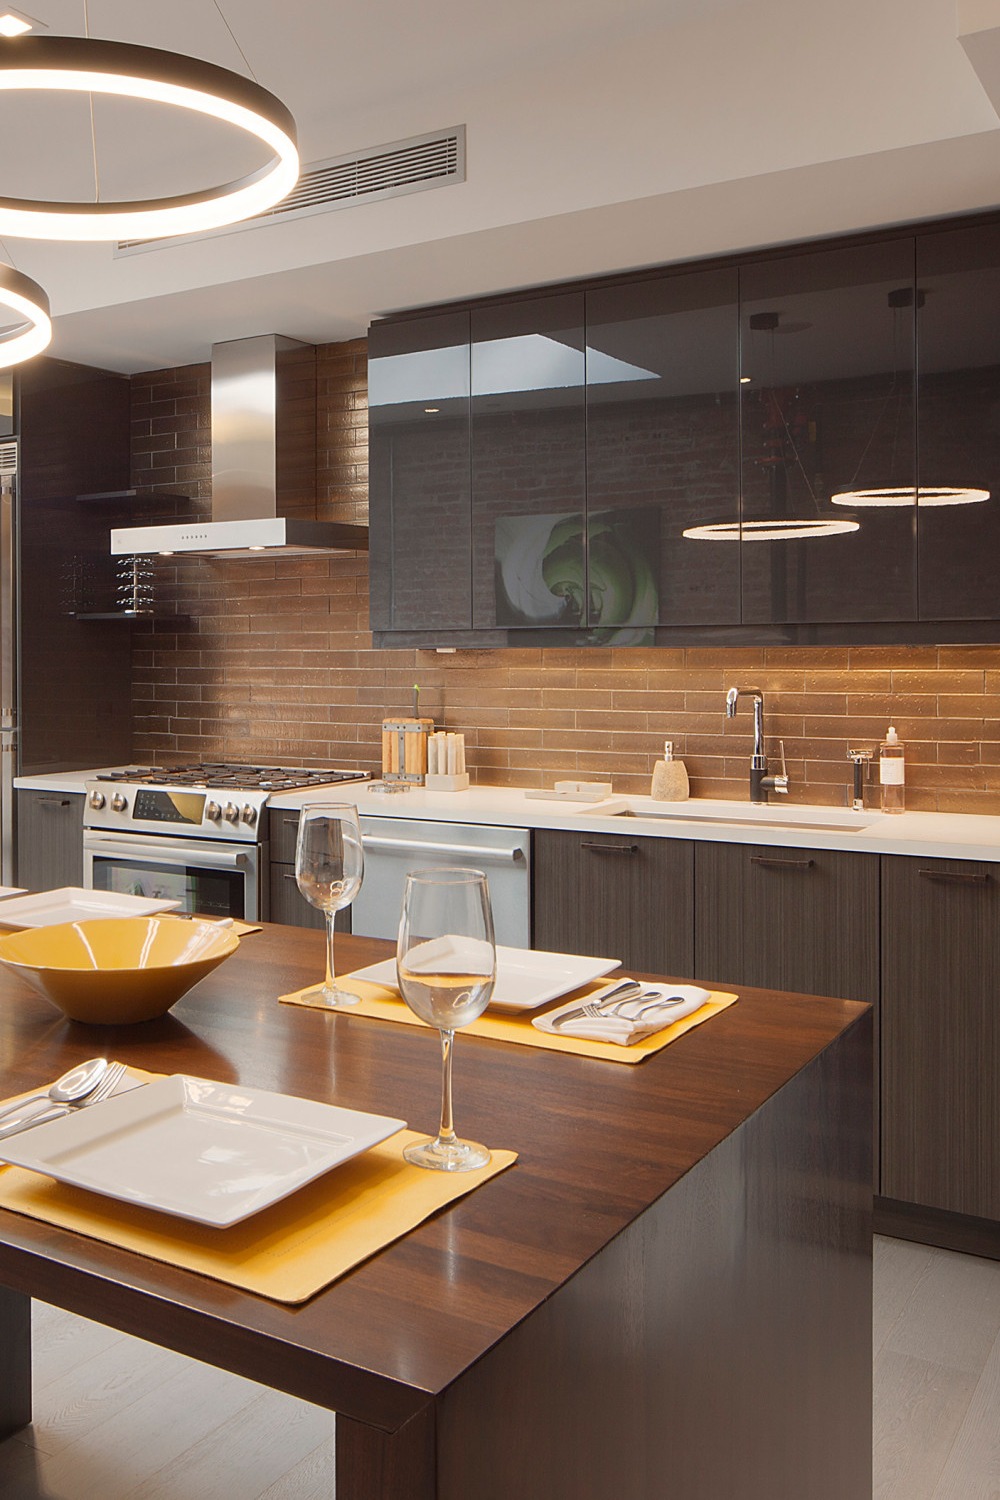 Brown Kitchen Cabinets Light Brown Cabinets Space Stainless Steel Appliances Grey Walls